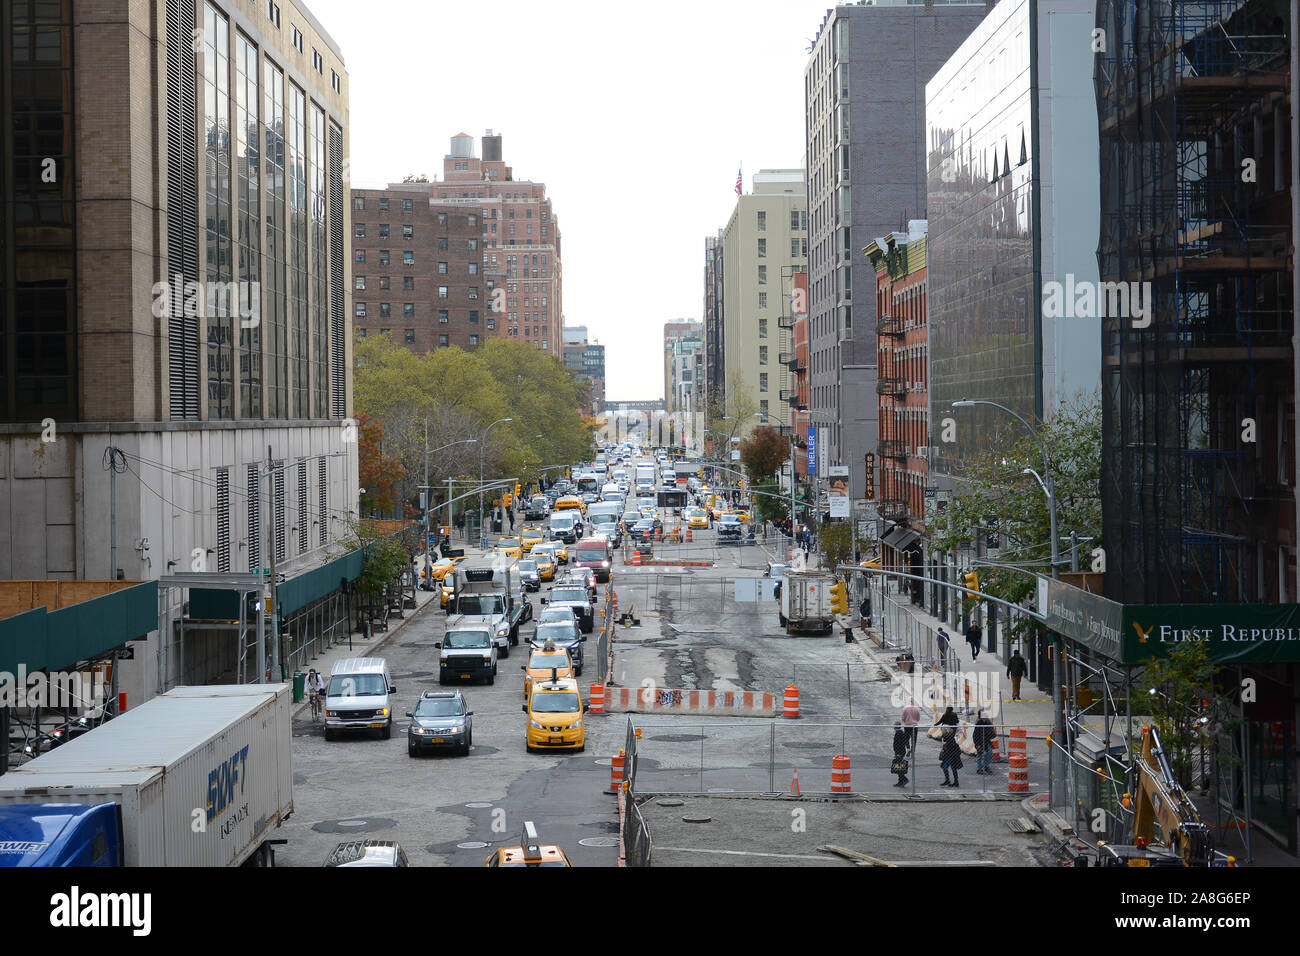 NEW YORK, NY - 05 NOV 2019: 10th Avenue seen from the High Line, with cars, pedestrians and construction. Stock Photo